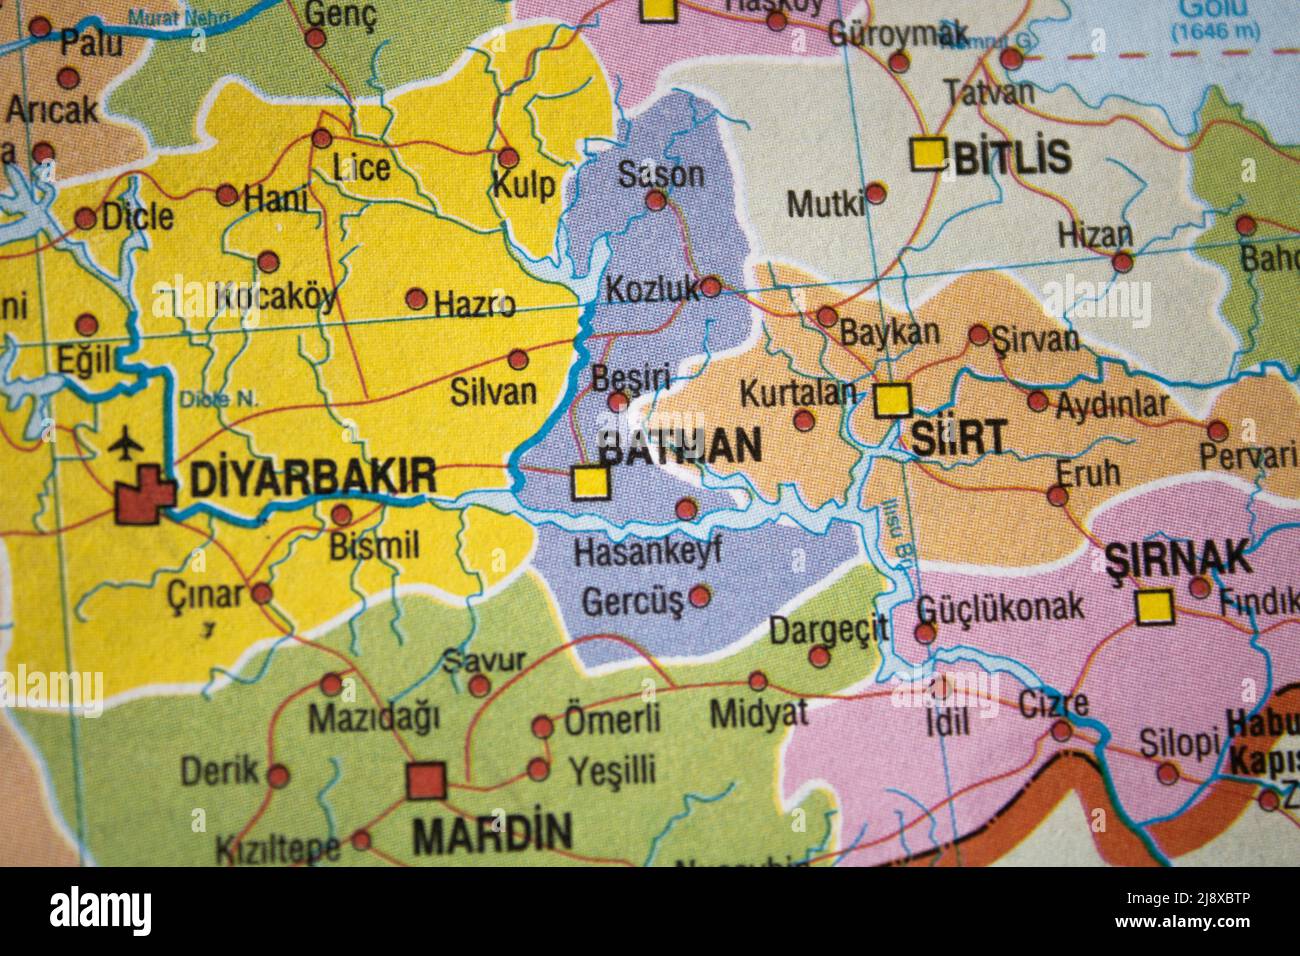 Close-up photo of Batman City in Turkey on the map Stock Photo